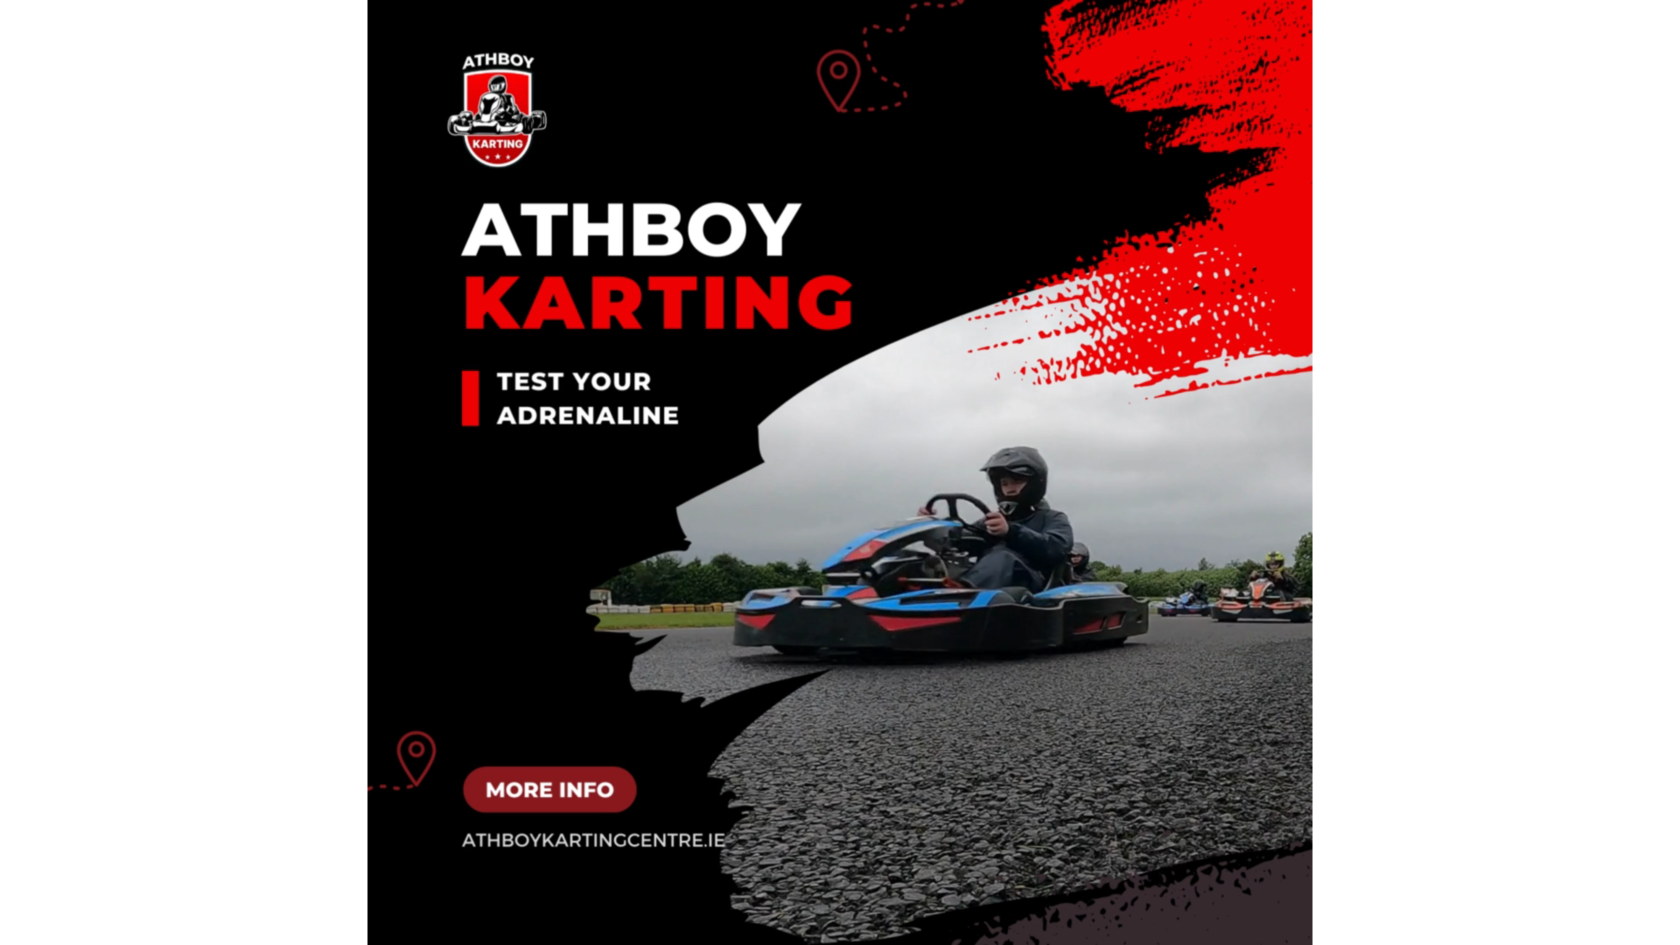 Weekend karting activity in Athboy